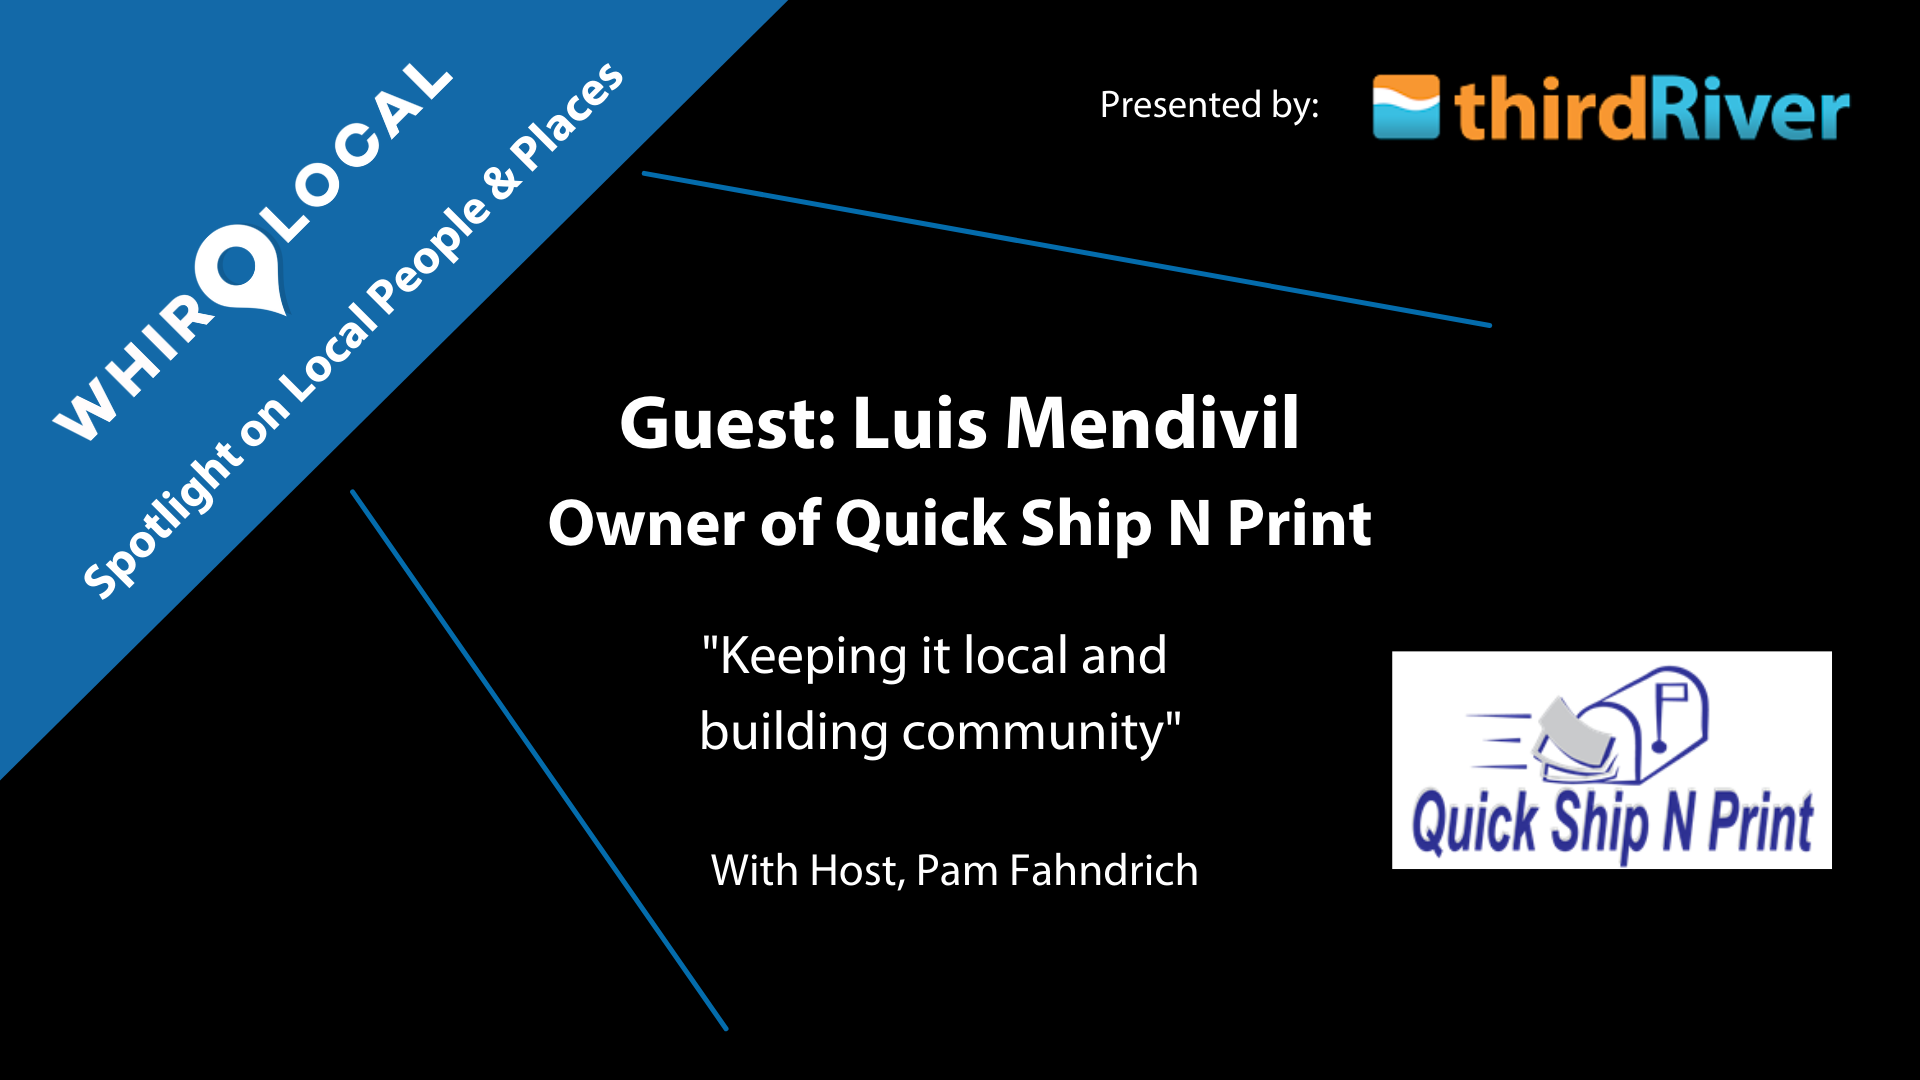 Interview with Luis Mendivil, owner of Quick Ship N Print